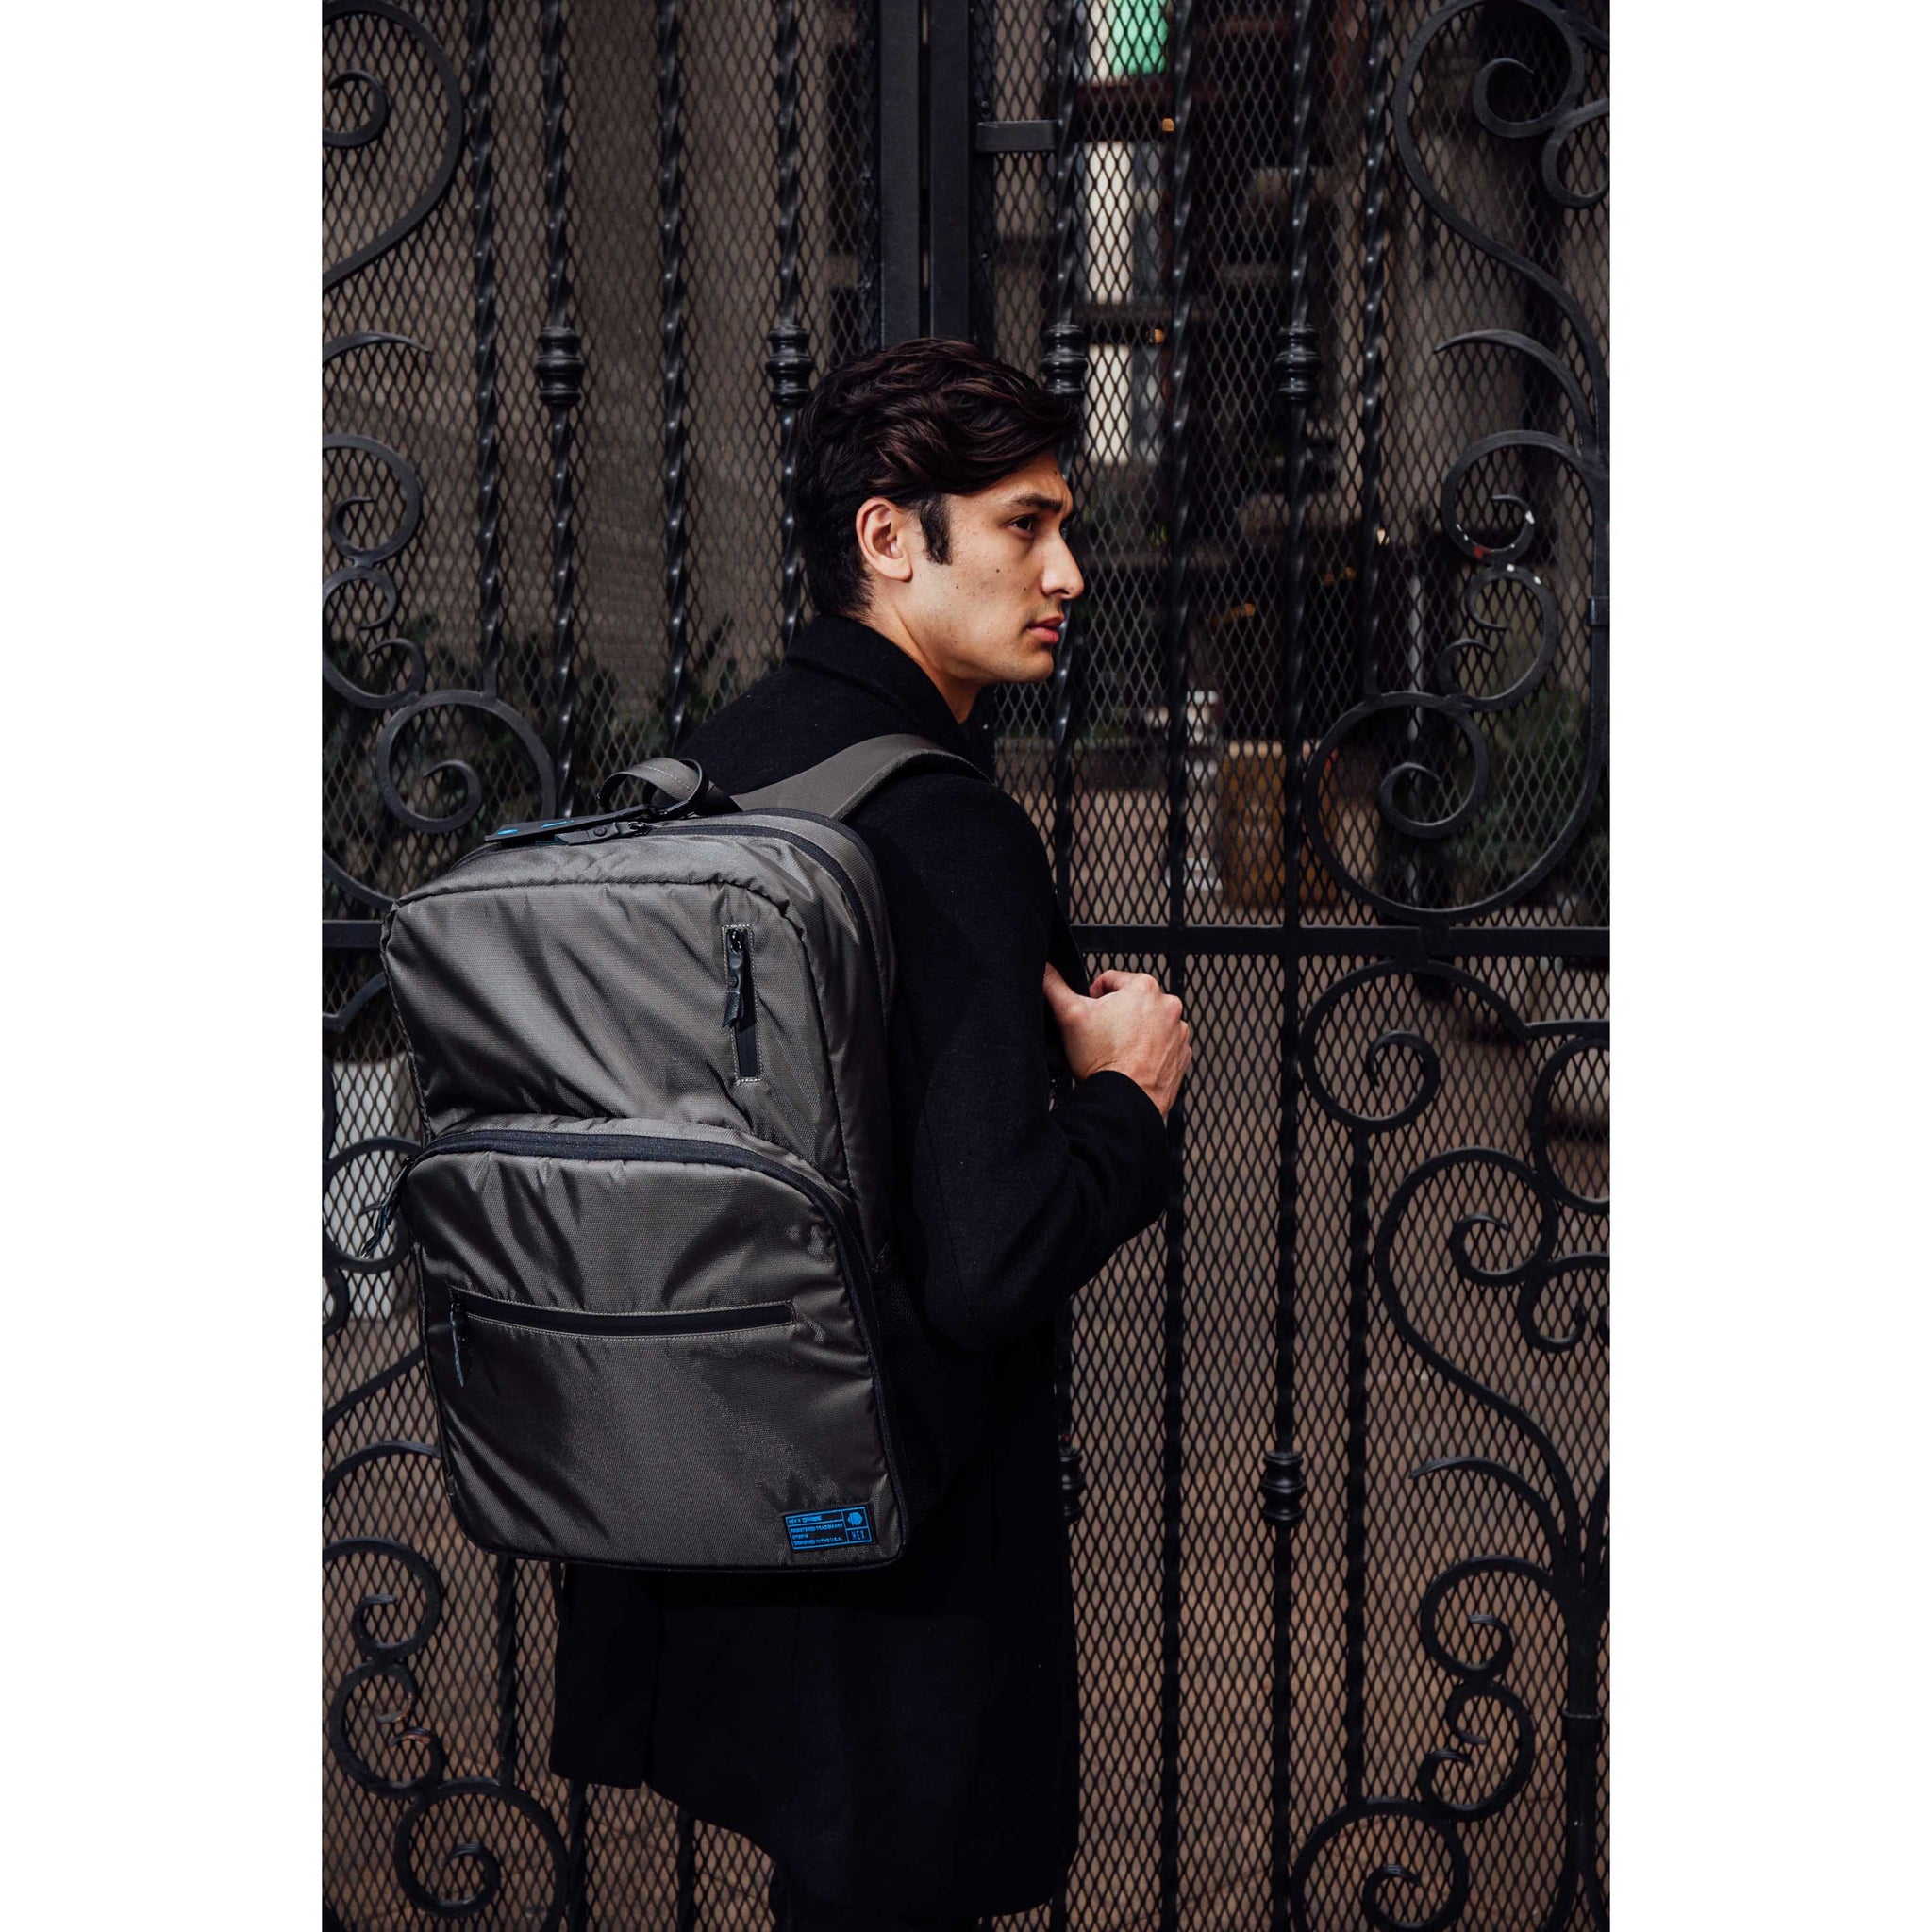 The 8 Best Artists Bags and Backpacks in 2023 (October) – Artlex